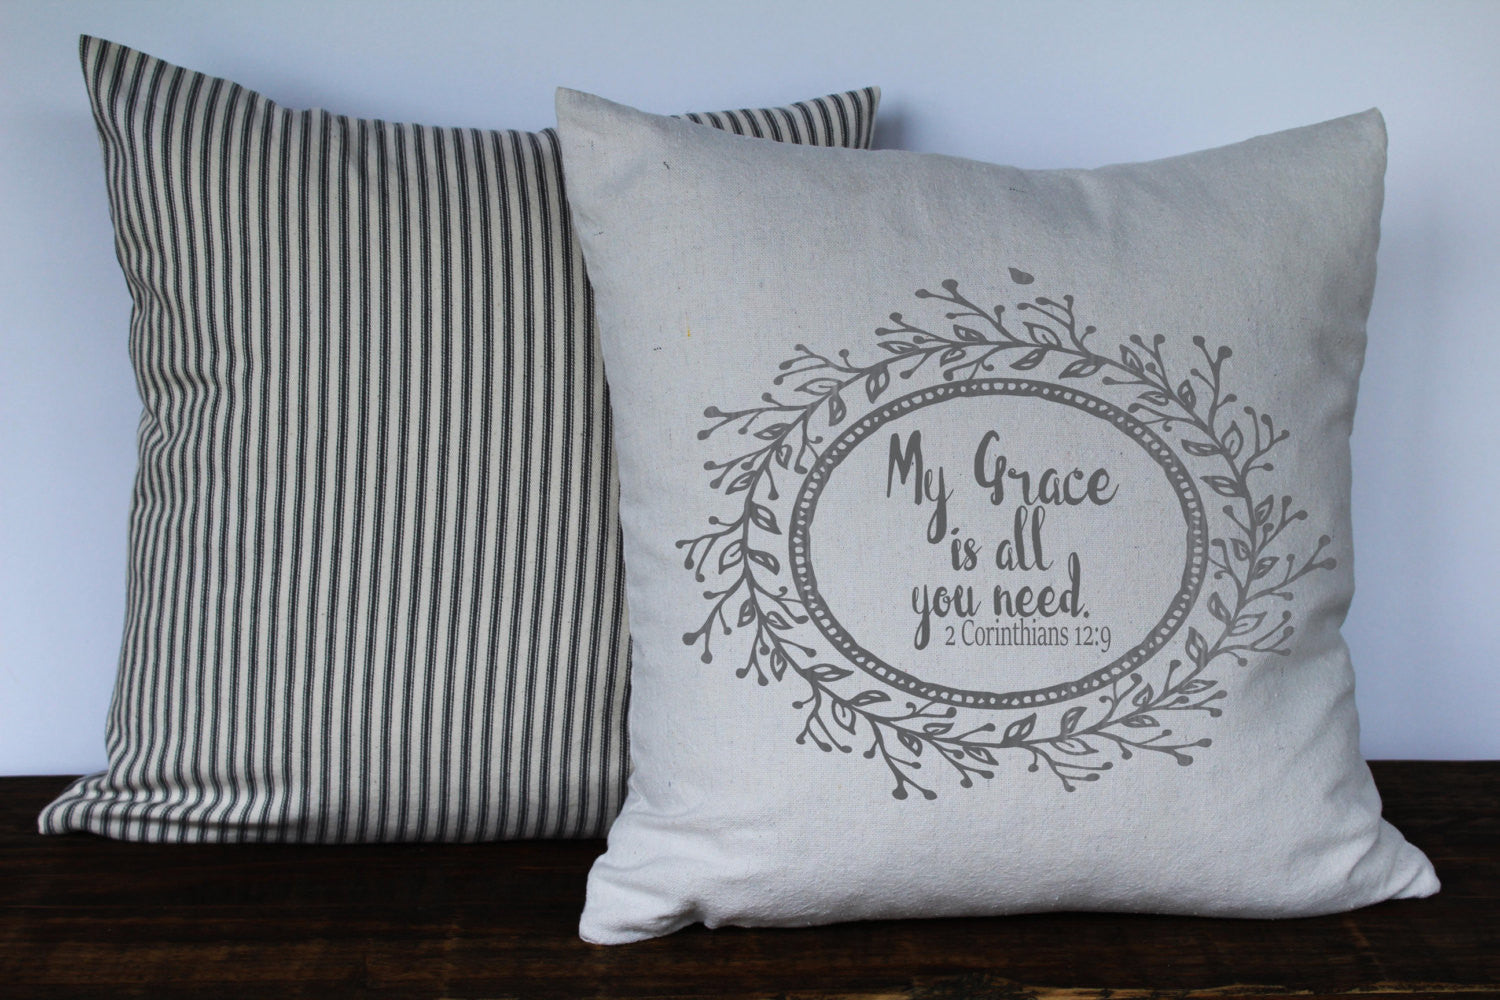 My Grace is All You Need 2 Corinthians 12:9 in Gray Scripture Pillow - Returning Grace Designs